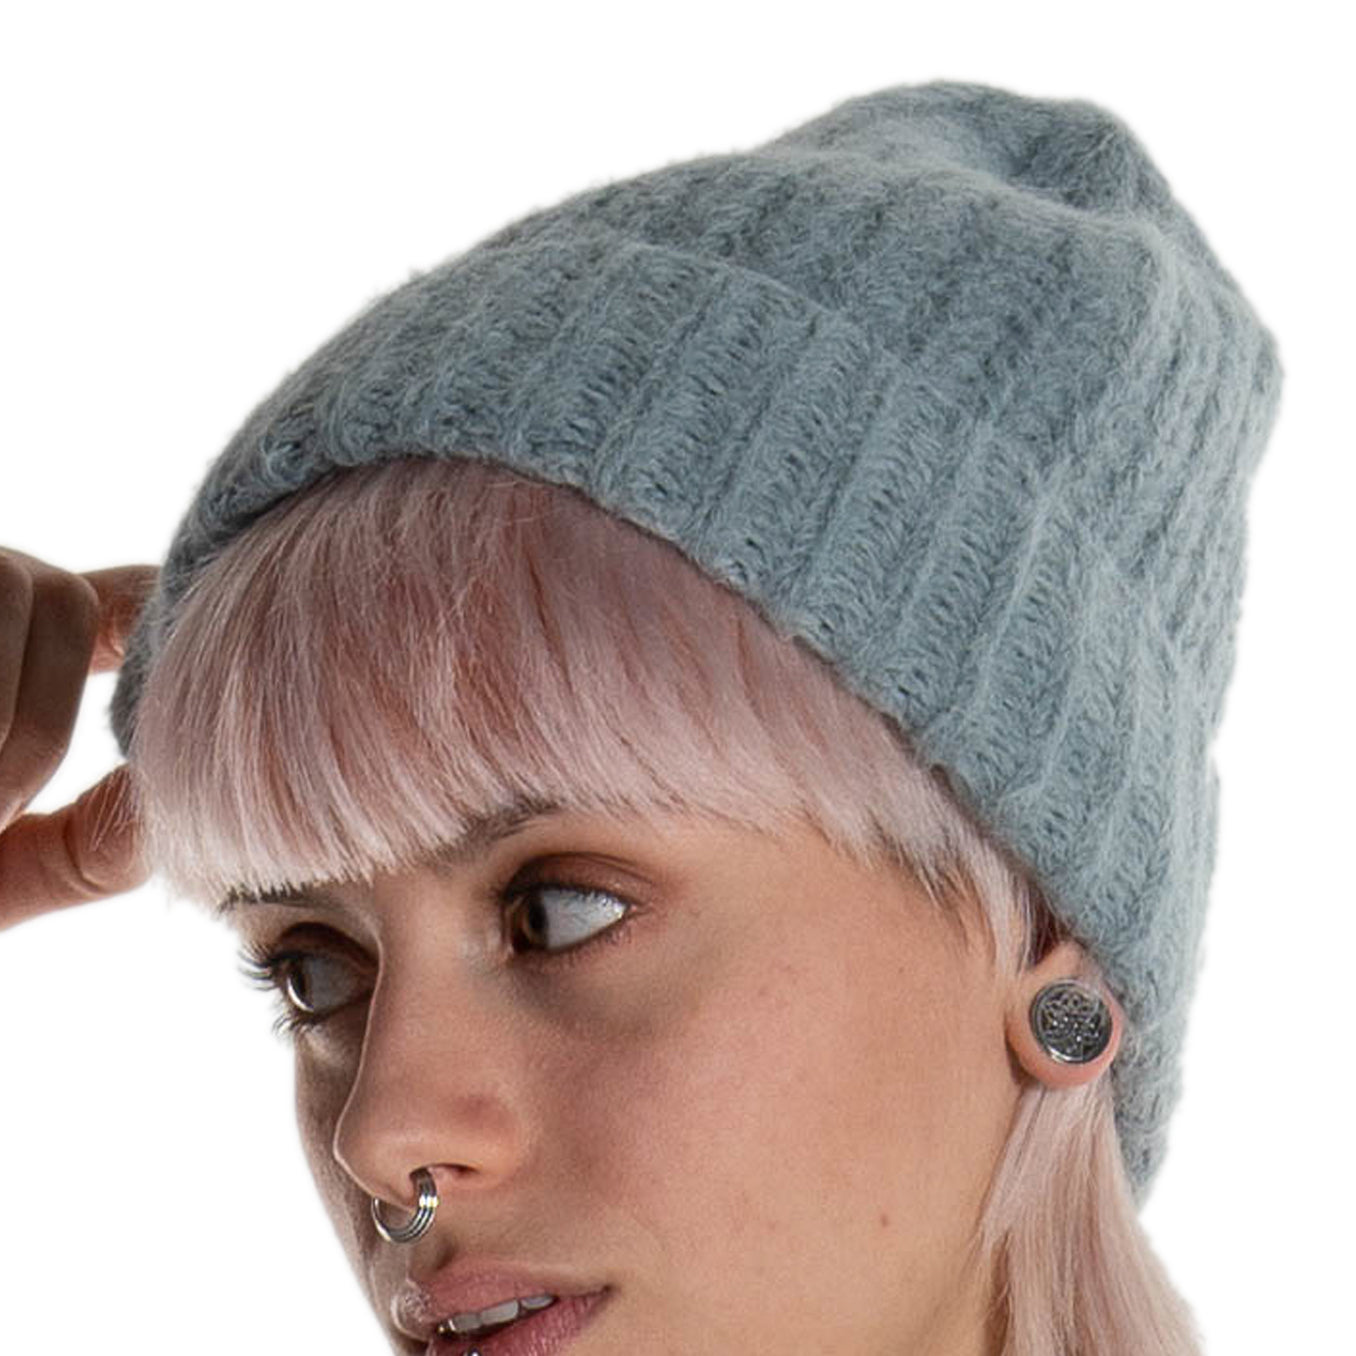 super fluffy hat made of alpaca and organic cotton